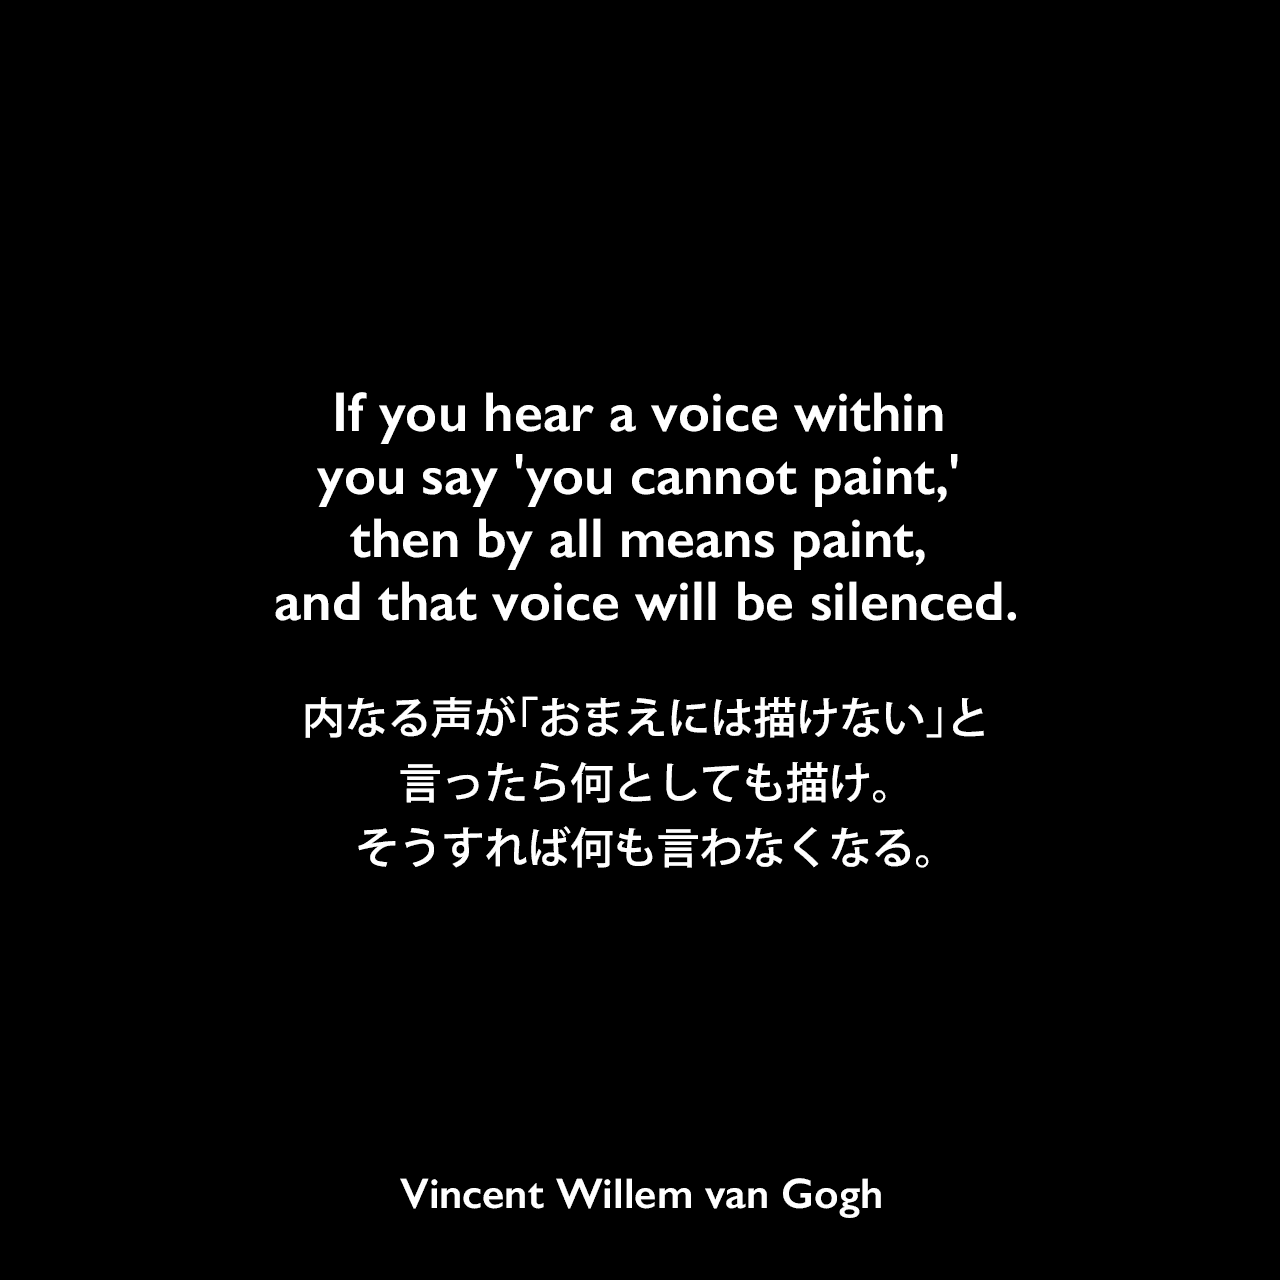 If you hear a voice within you say 'you cannot paint,' then by all means paint, and that voice will be silenced.内なる声が「おまえには描けない」と言ったら、何としても描け。そうすれば何も言わなくなる。- ゴッホの手紙よりVincent Willem van Gogh